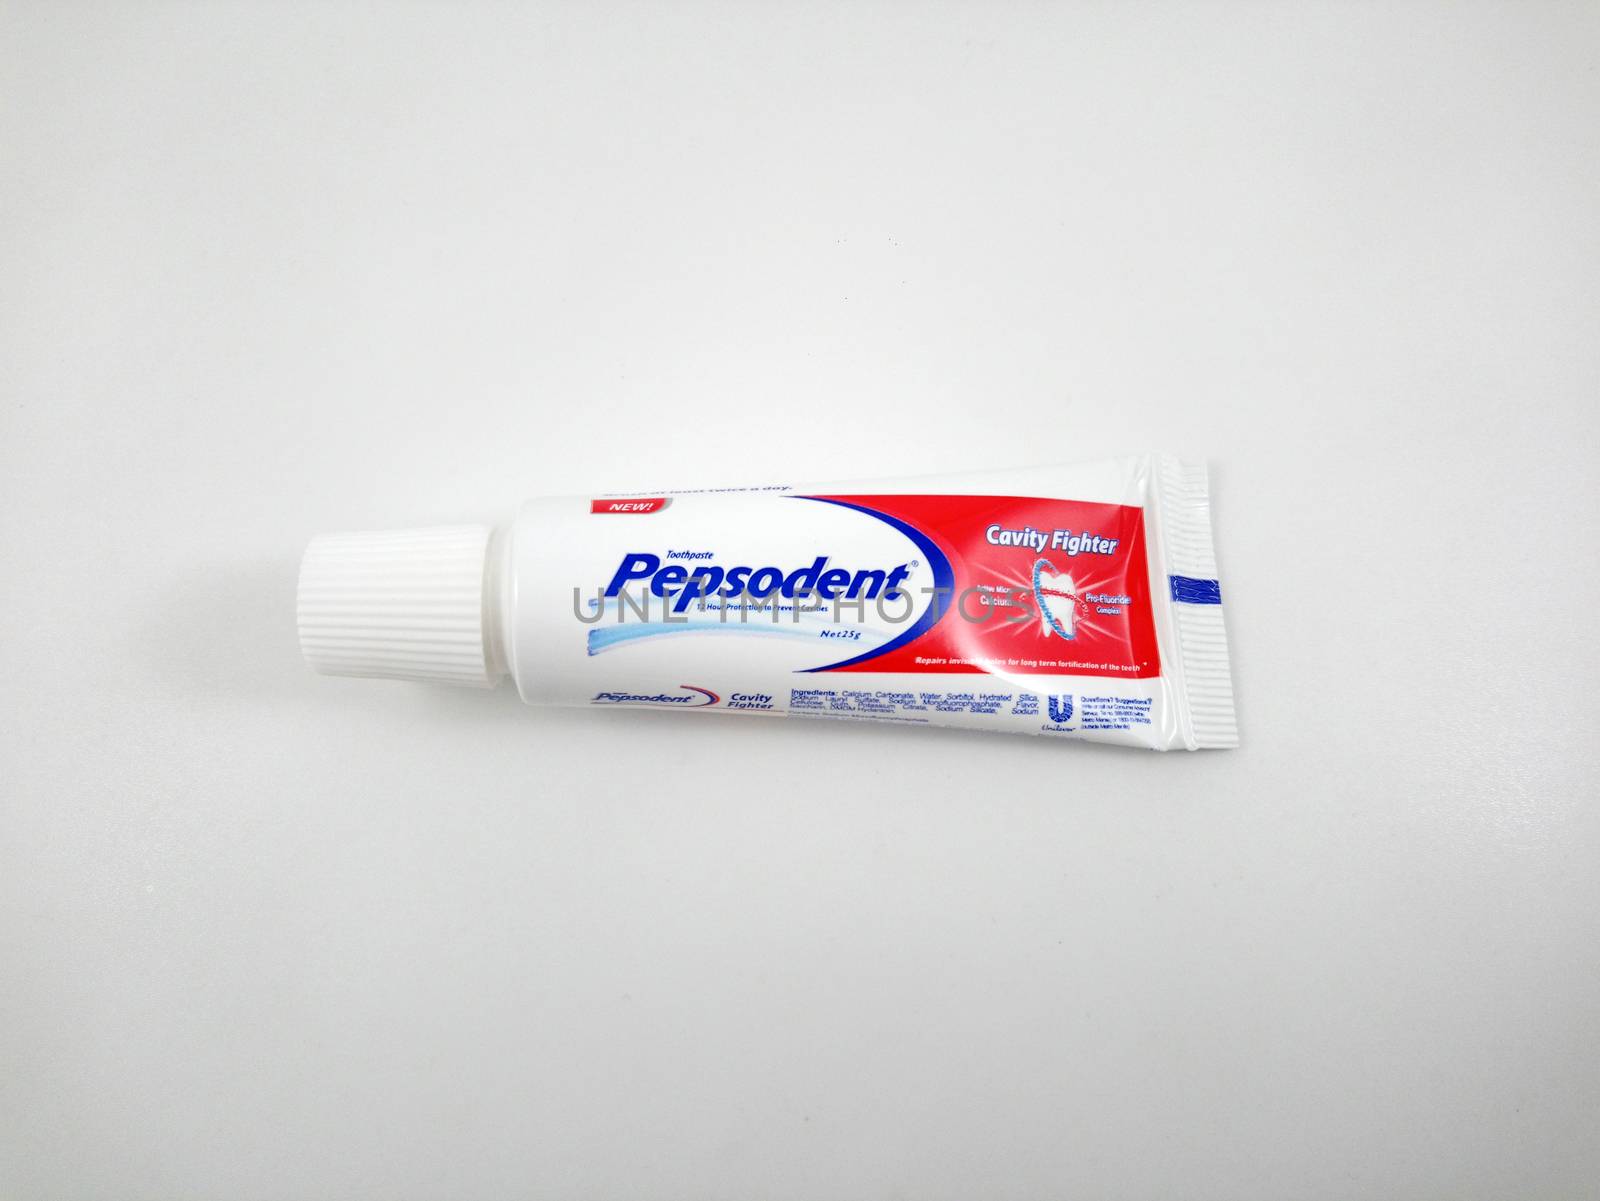 Pepsodent toothpaste tube in Manila, Philippines by imwaltersy